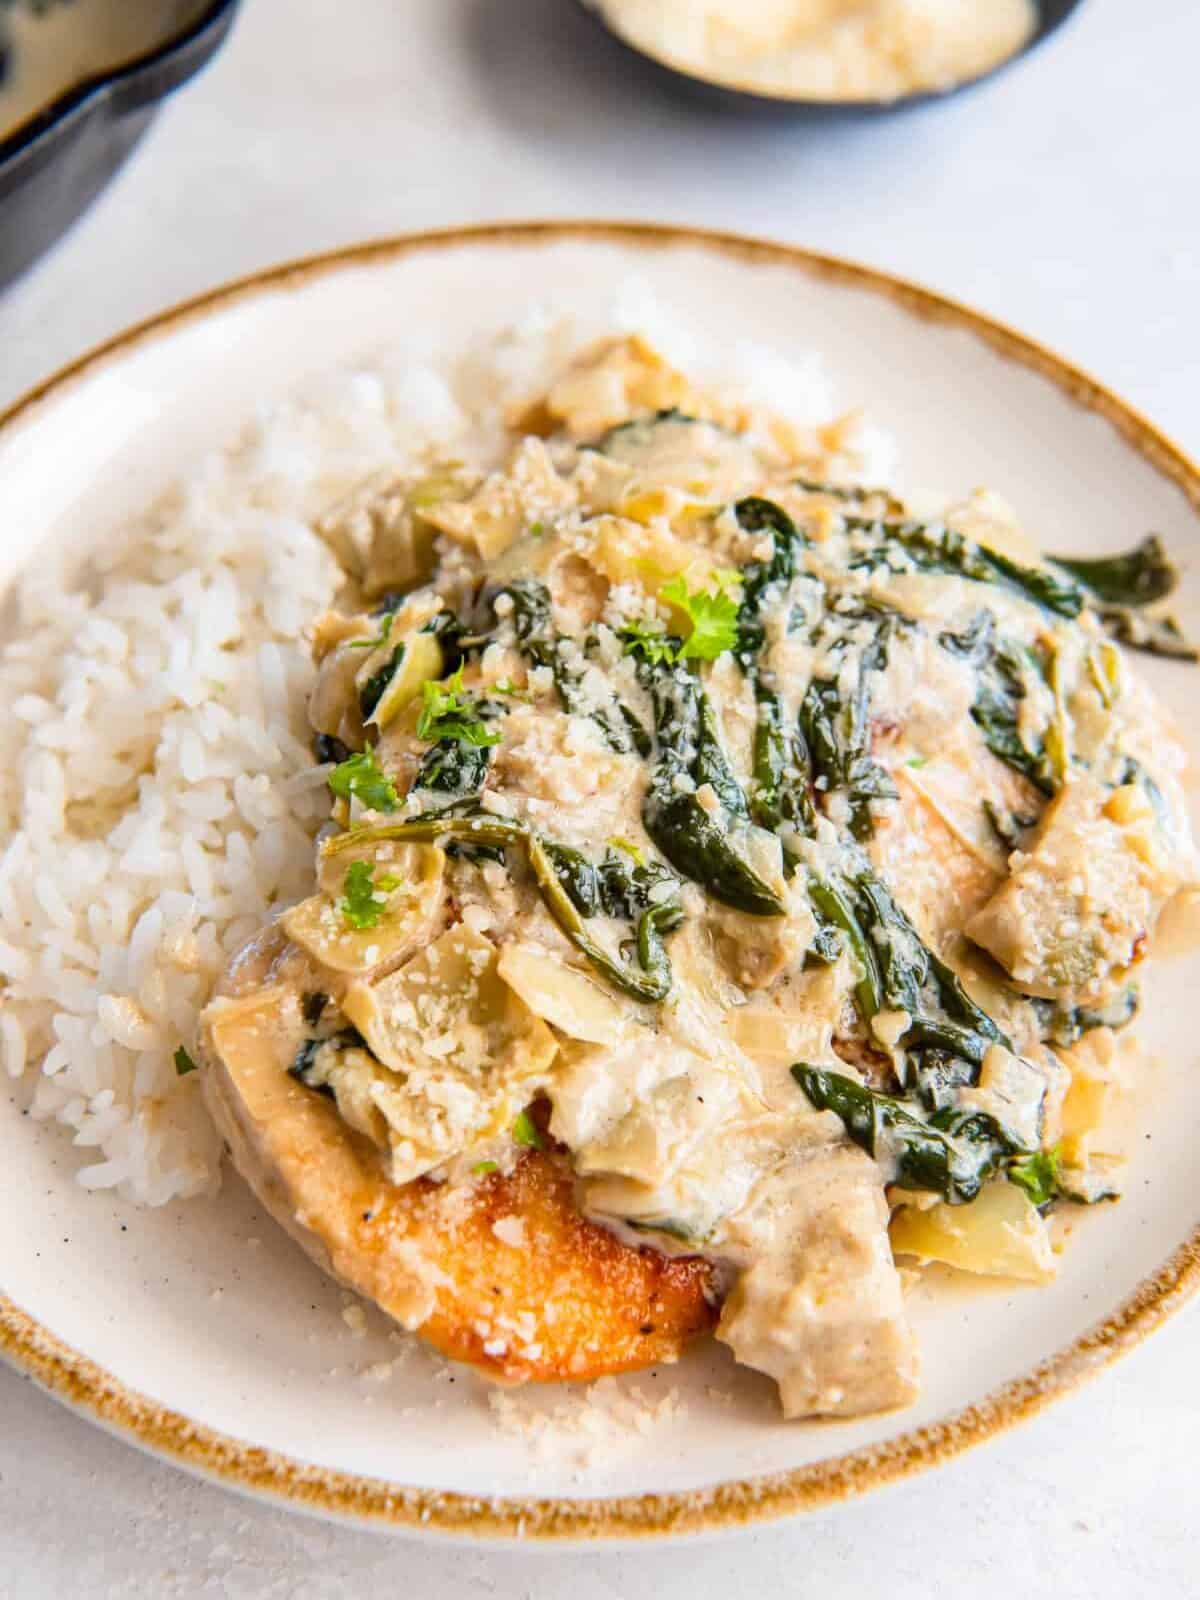 spinach artichoke chicken on a bed of white rice on a white plate.